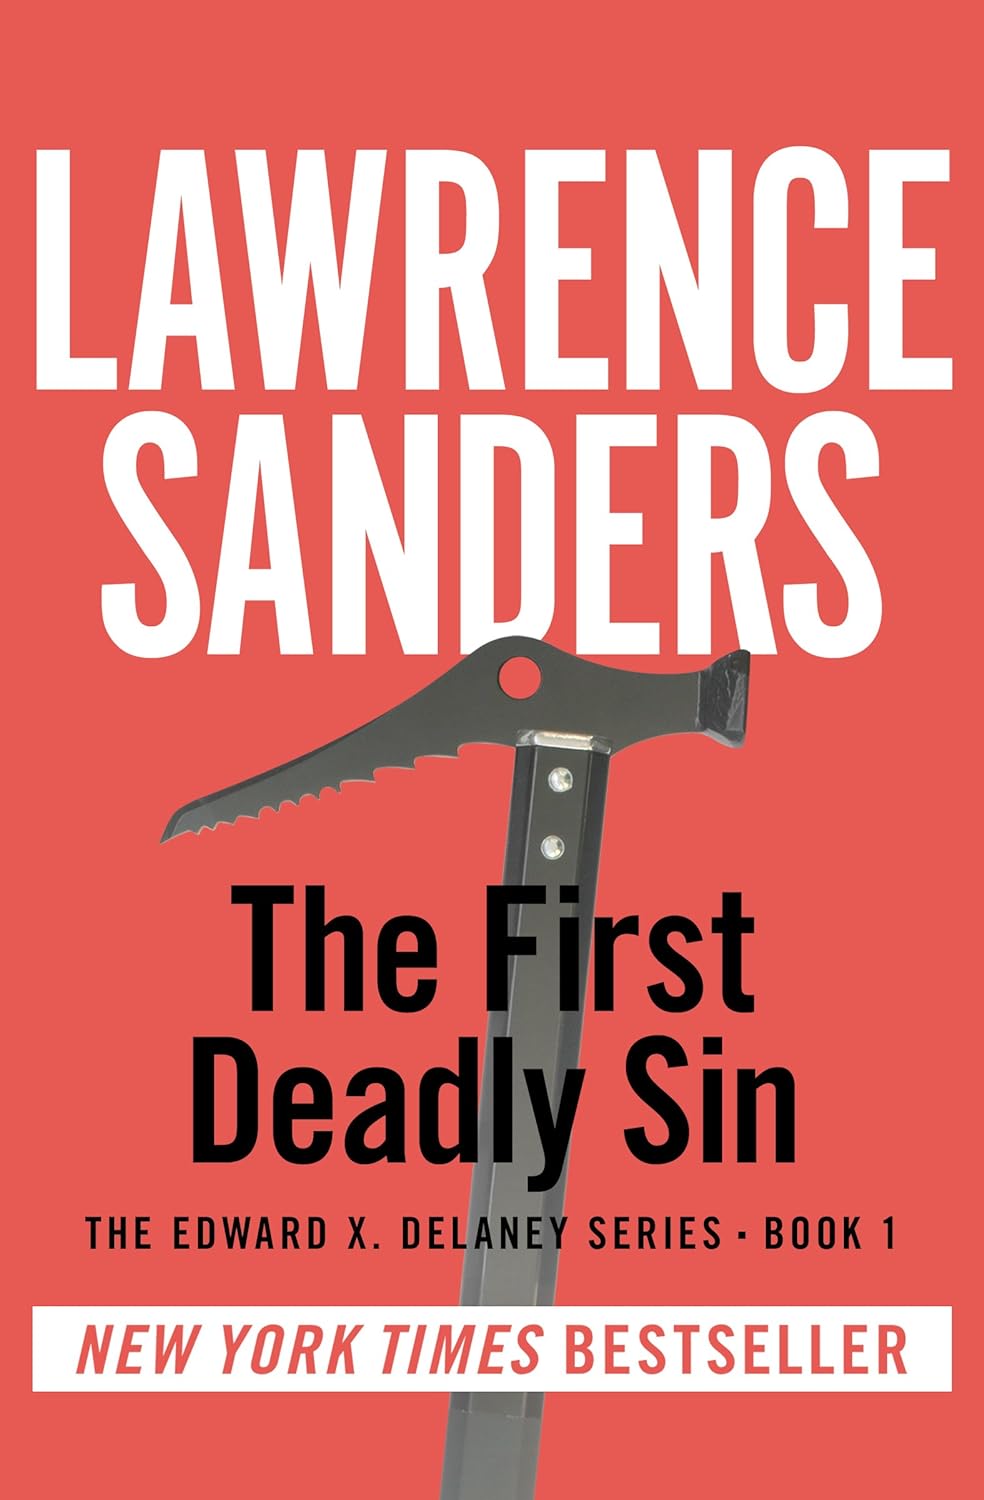 The First Deadly Sin book cover